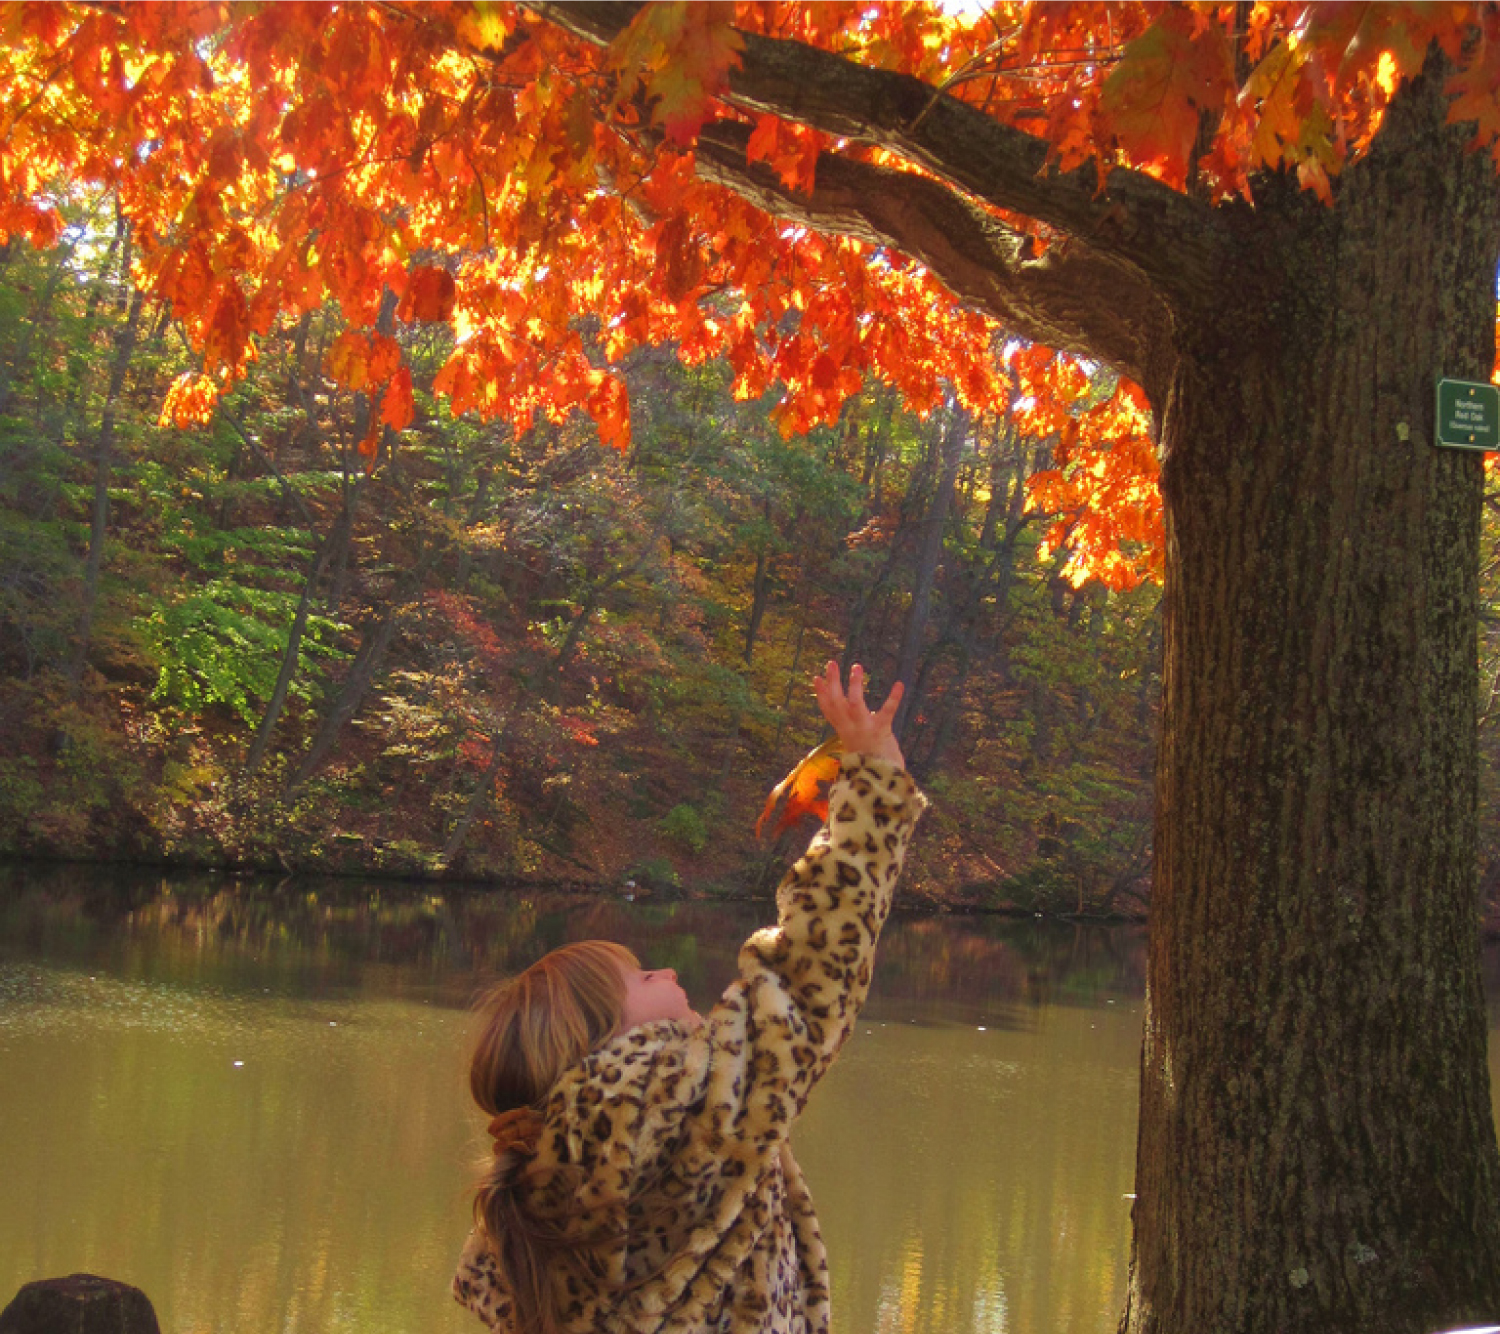 Young girl catching a falling leaf from a tree in the Fall.